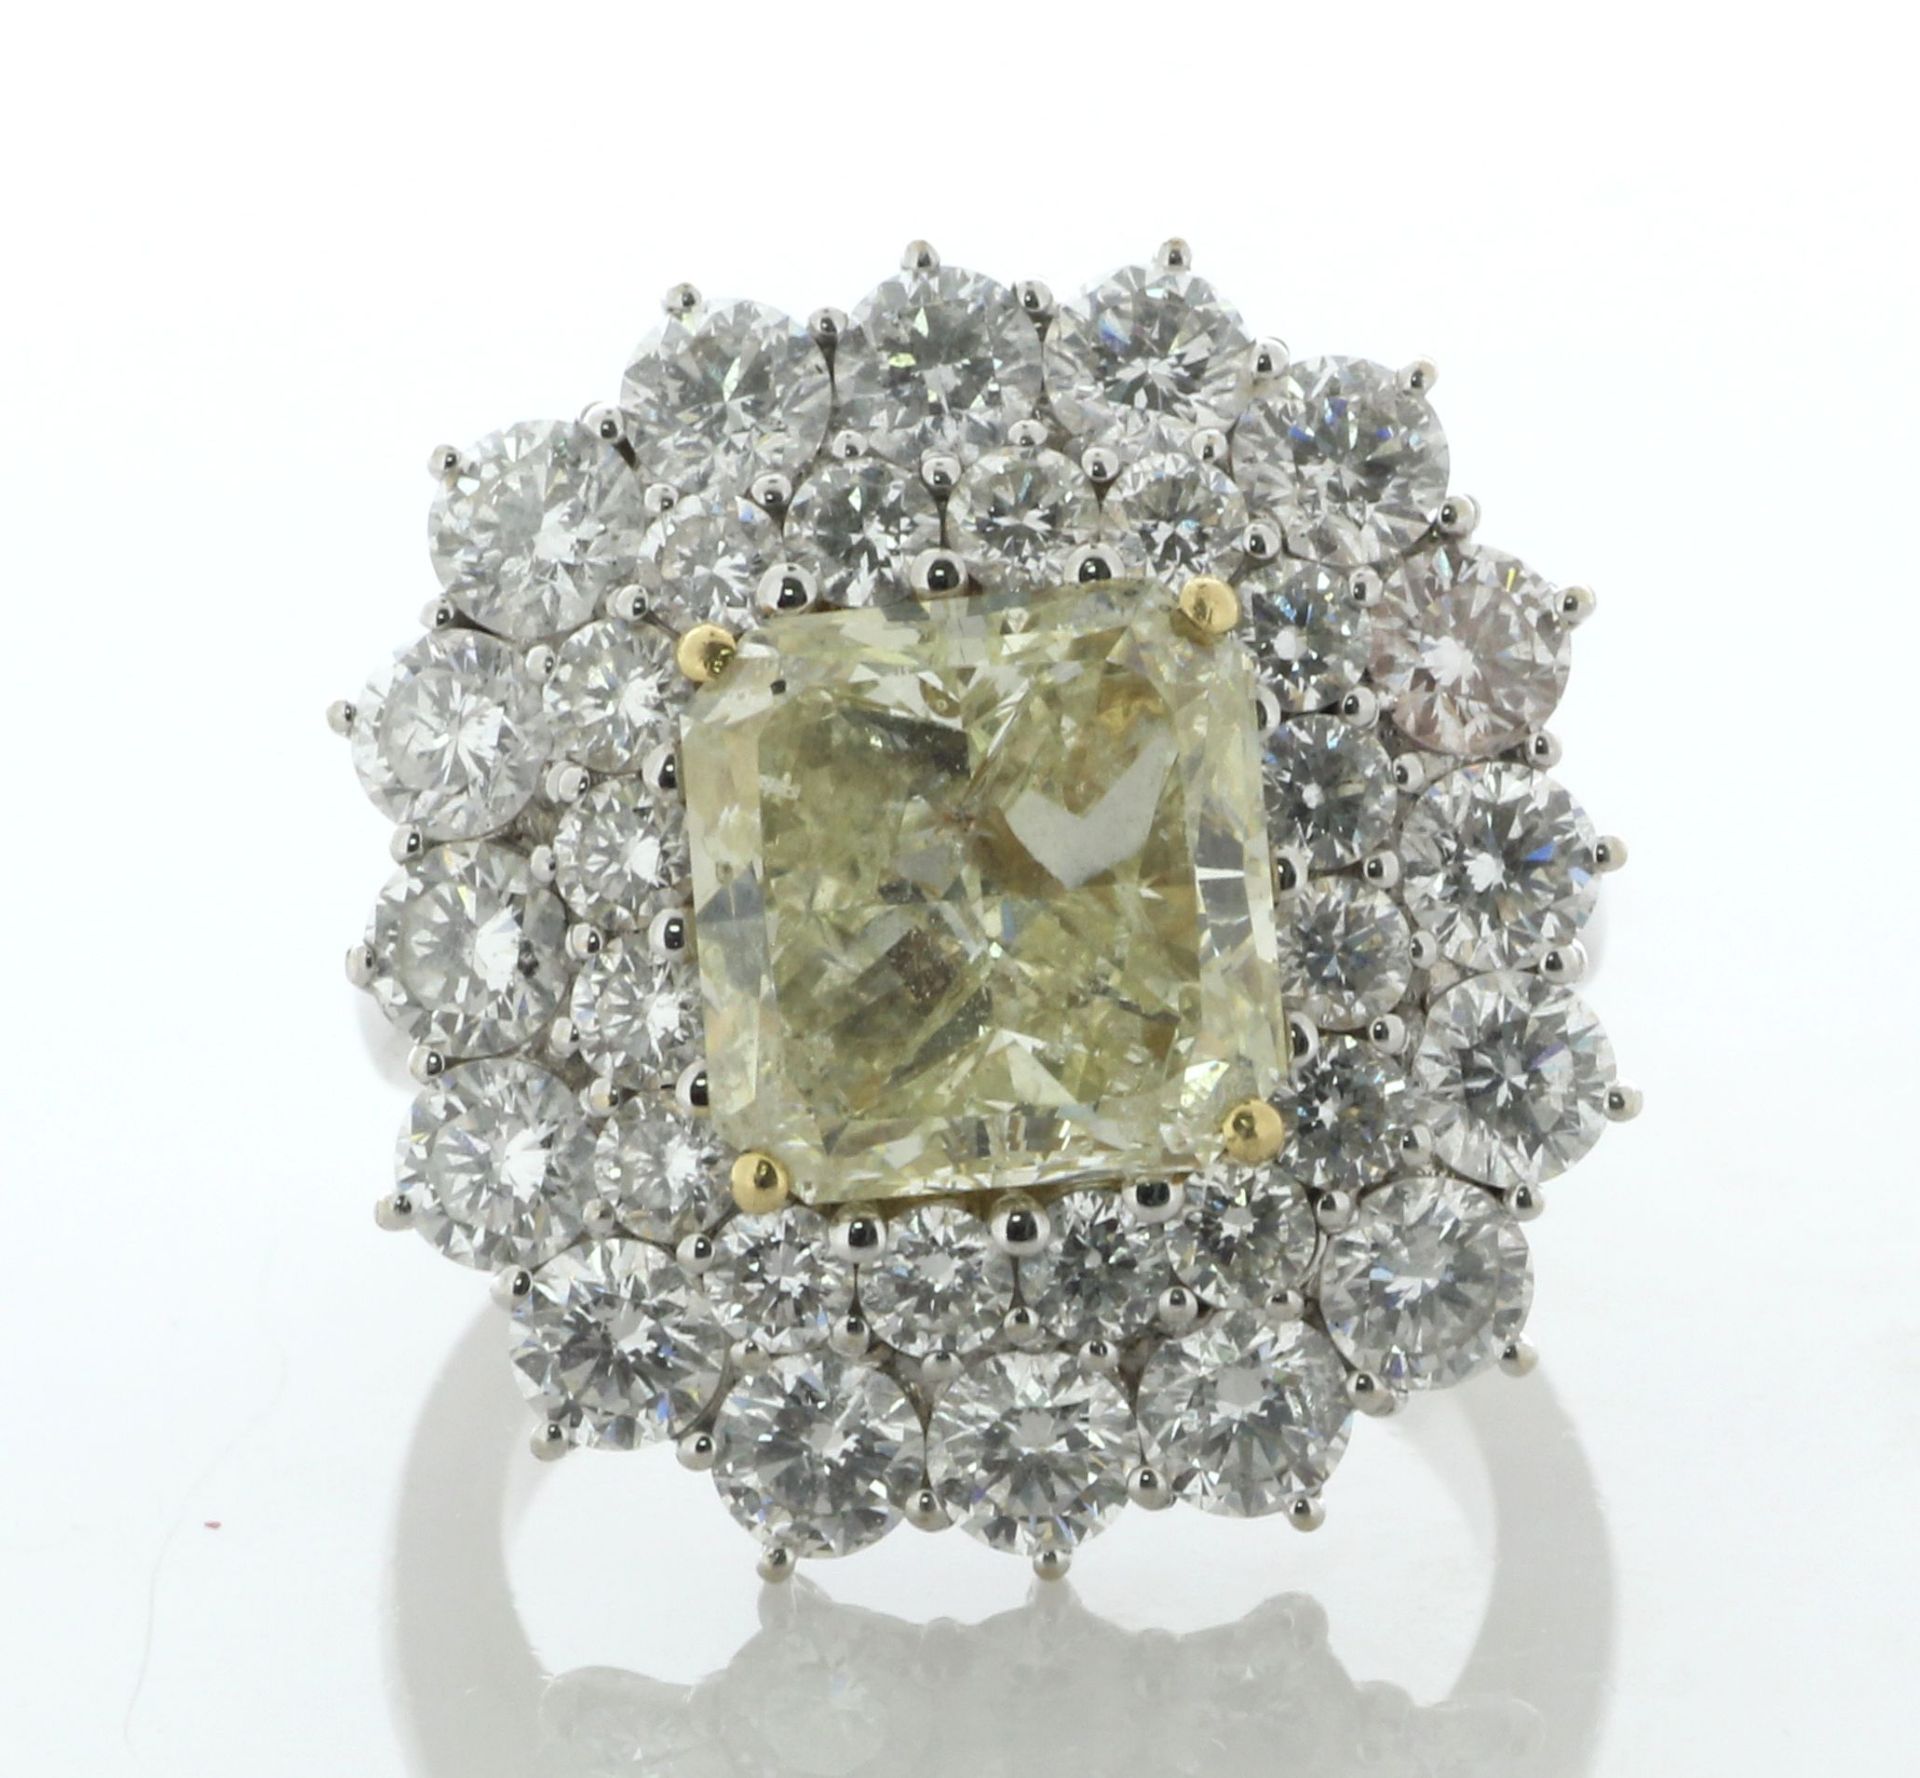 18ct White Gold Radiant Cut Fancy Cluster Diamond Ring (4.58) 2.88 Carats - Image 2 of 8